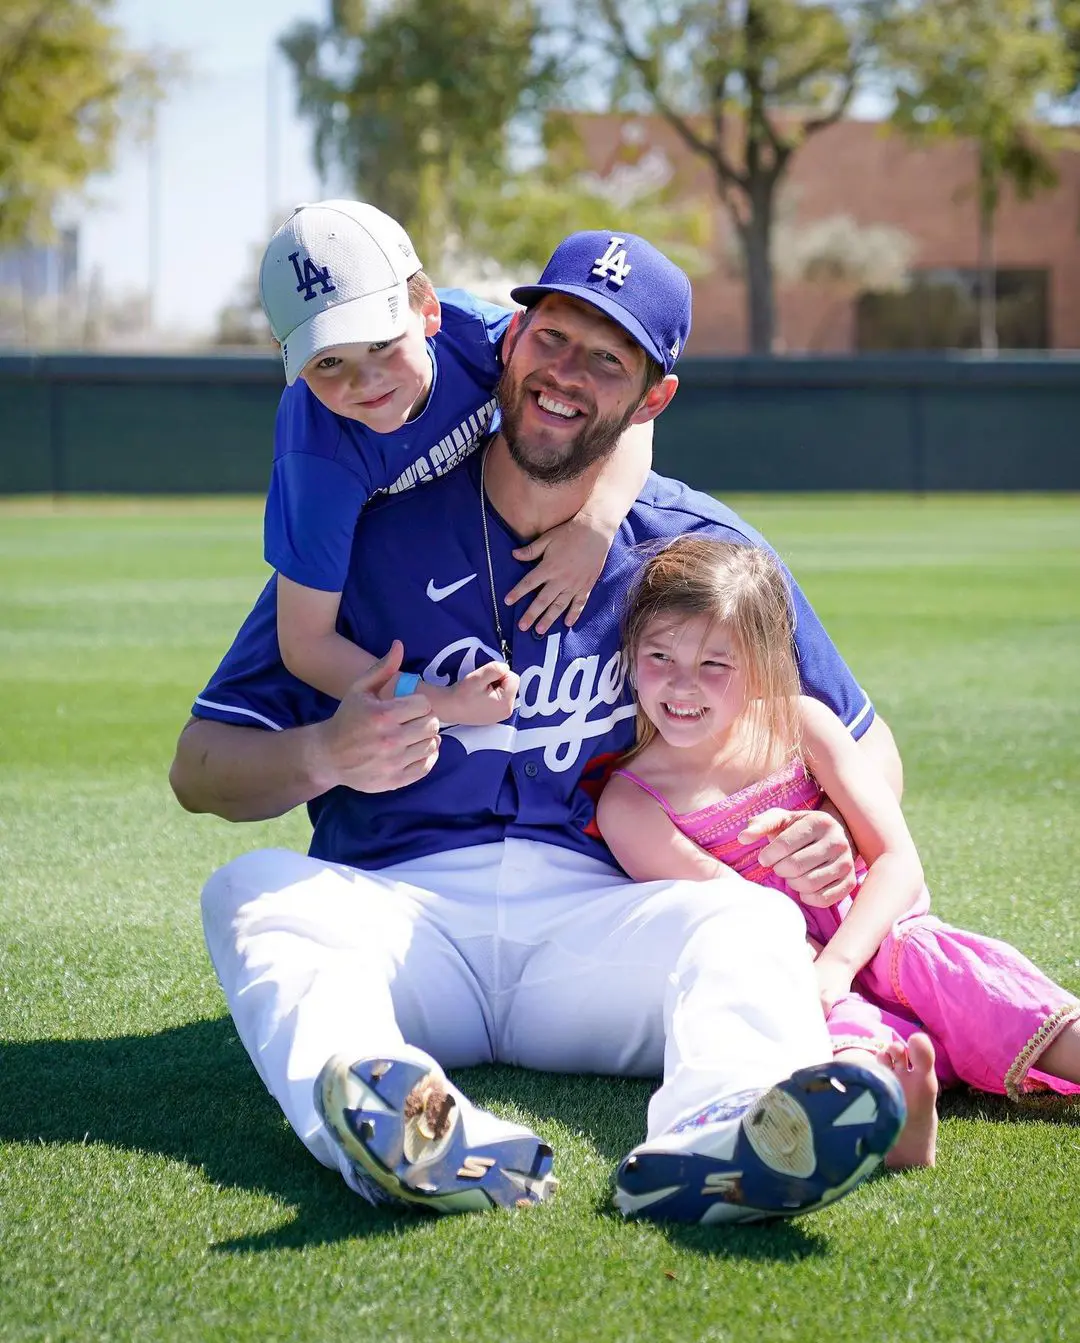 Clayton Kershaw pictured with his kids, has been a one-team player throughout his career 